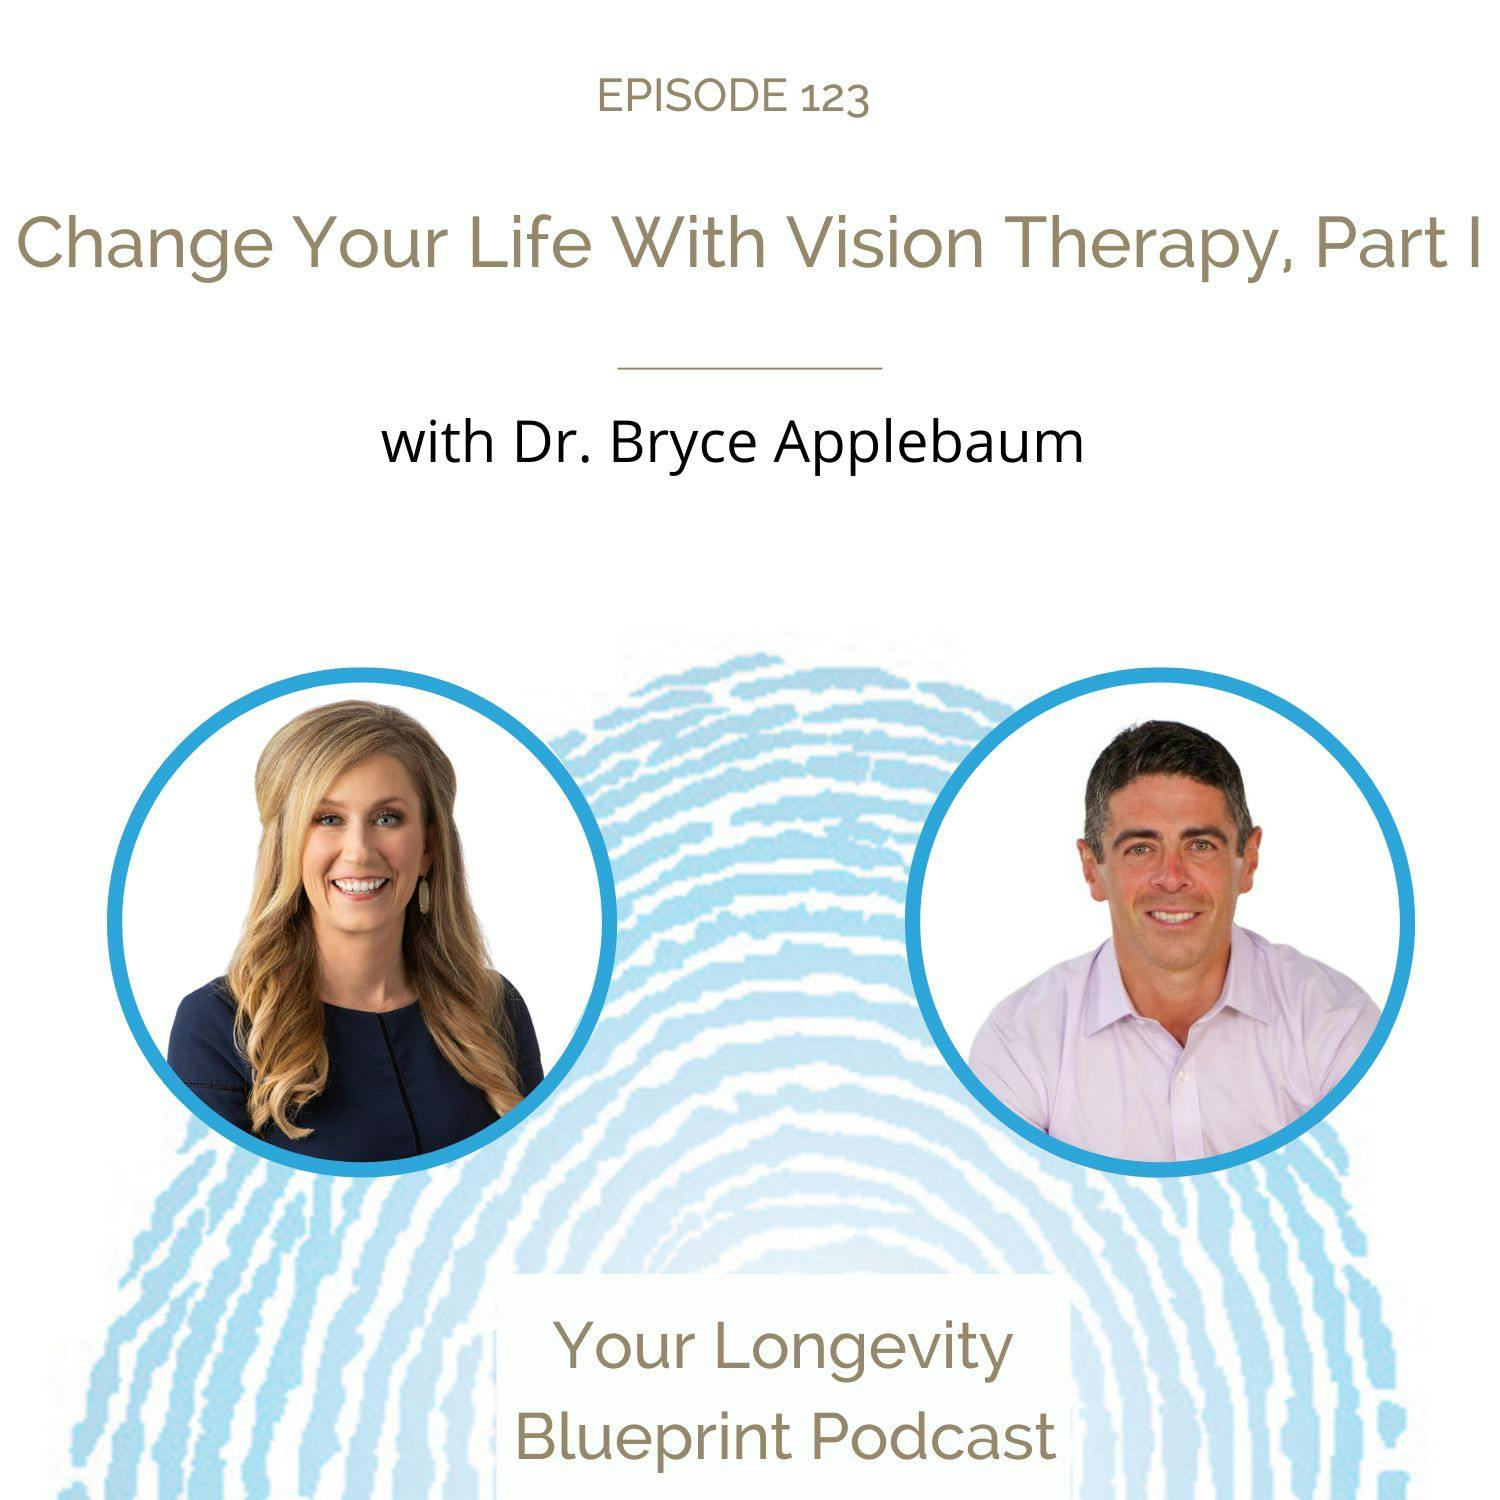 Change Your Life With Vision Therapy with Dr. Bryce Applebaum, Part 1